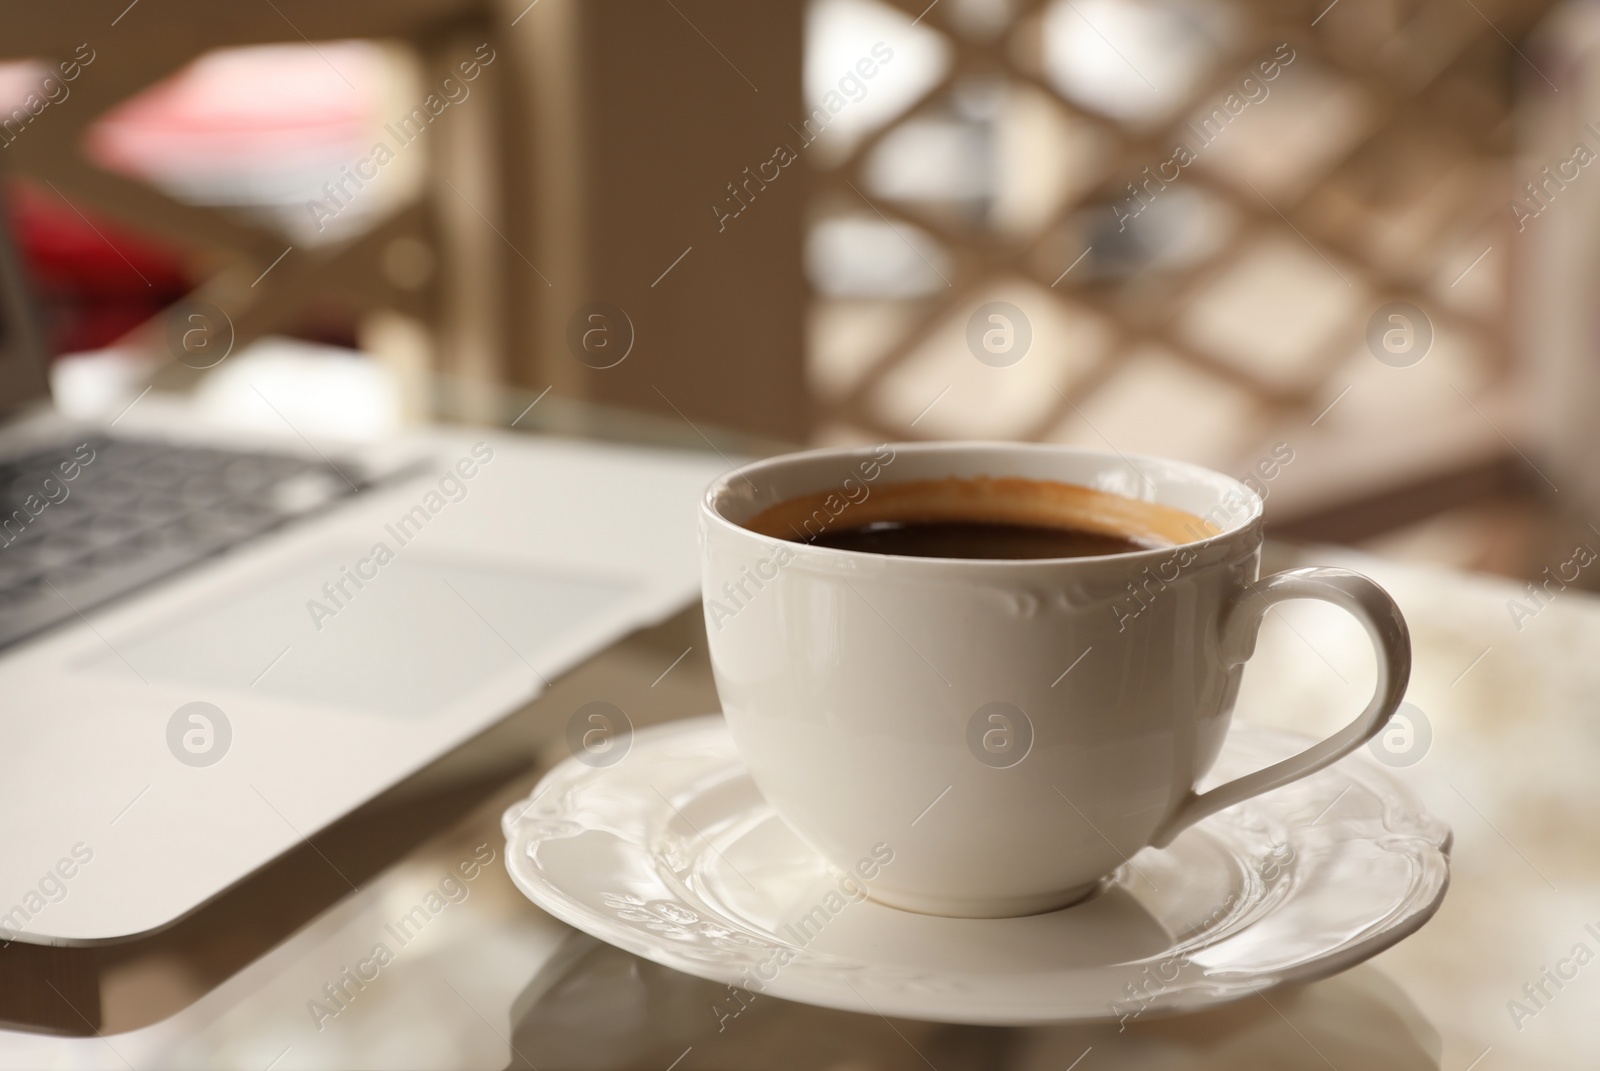 Photo of Cup of aromatic morning coffee and laptop on table in cafe